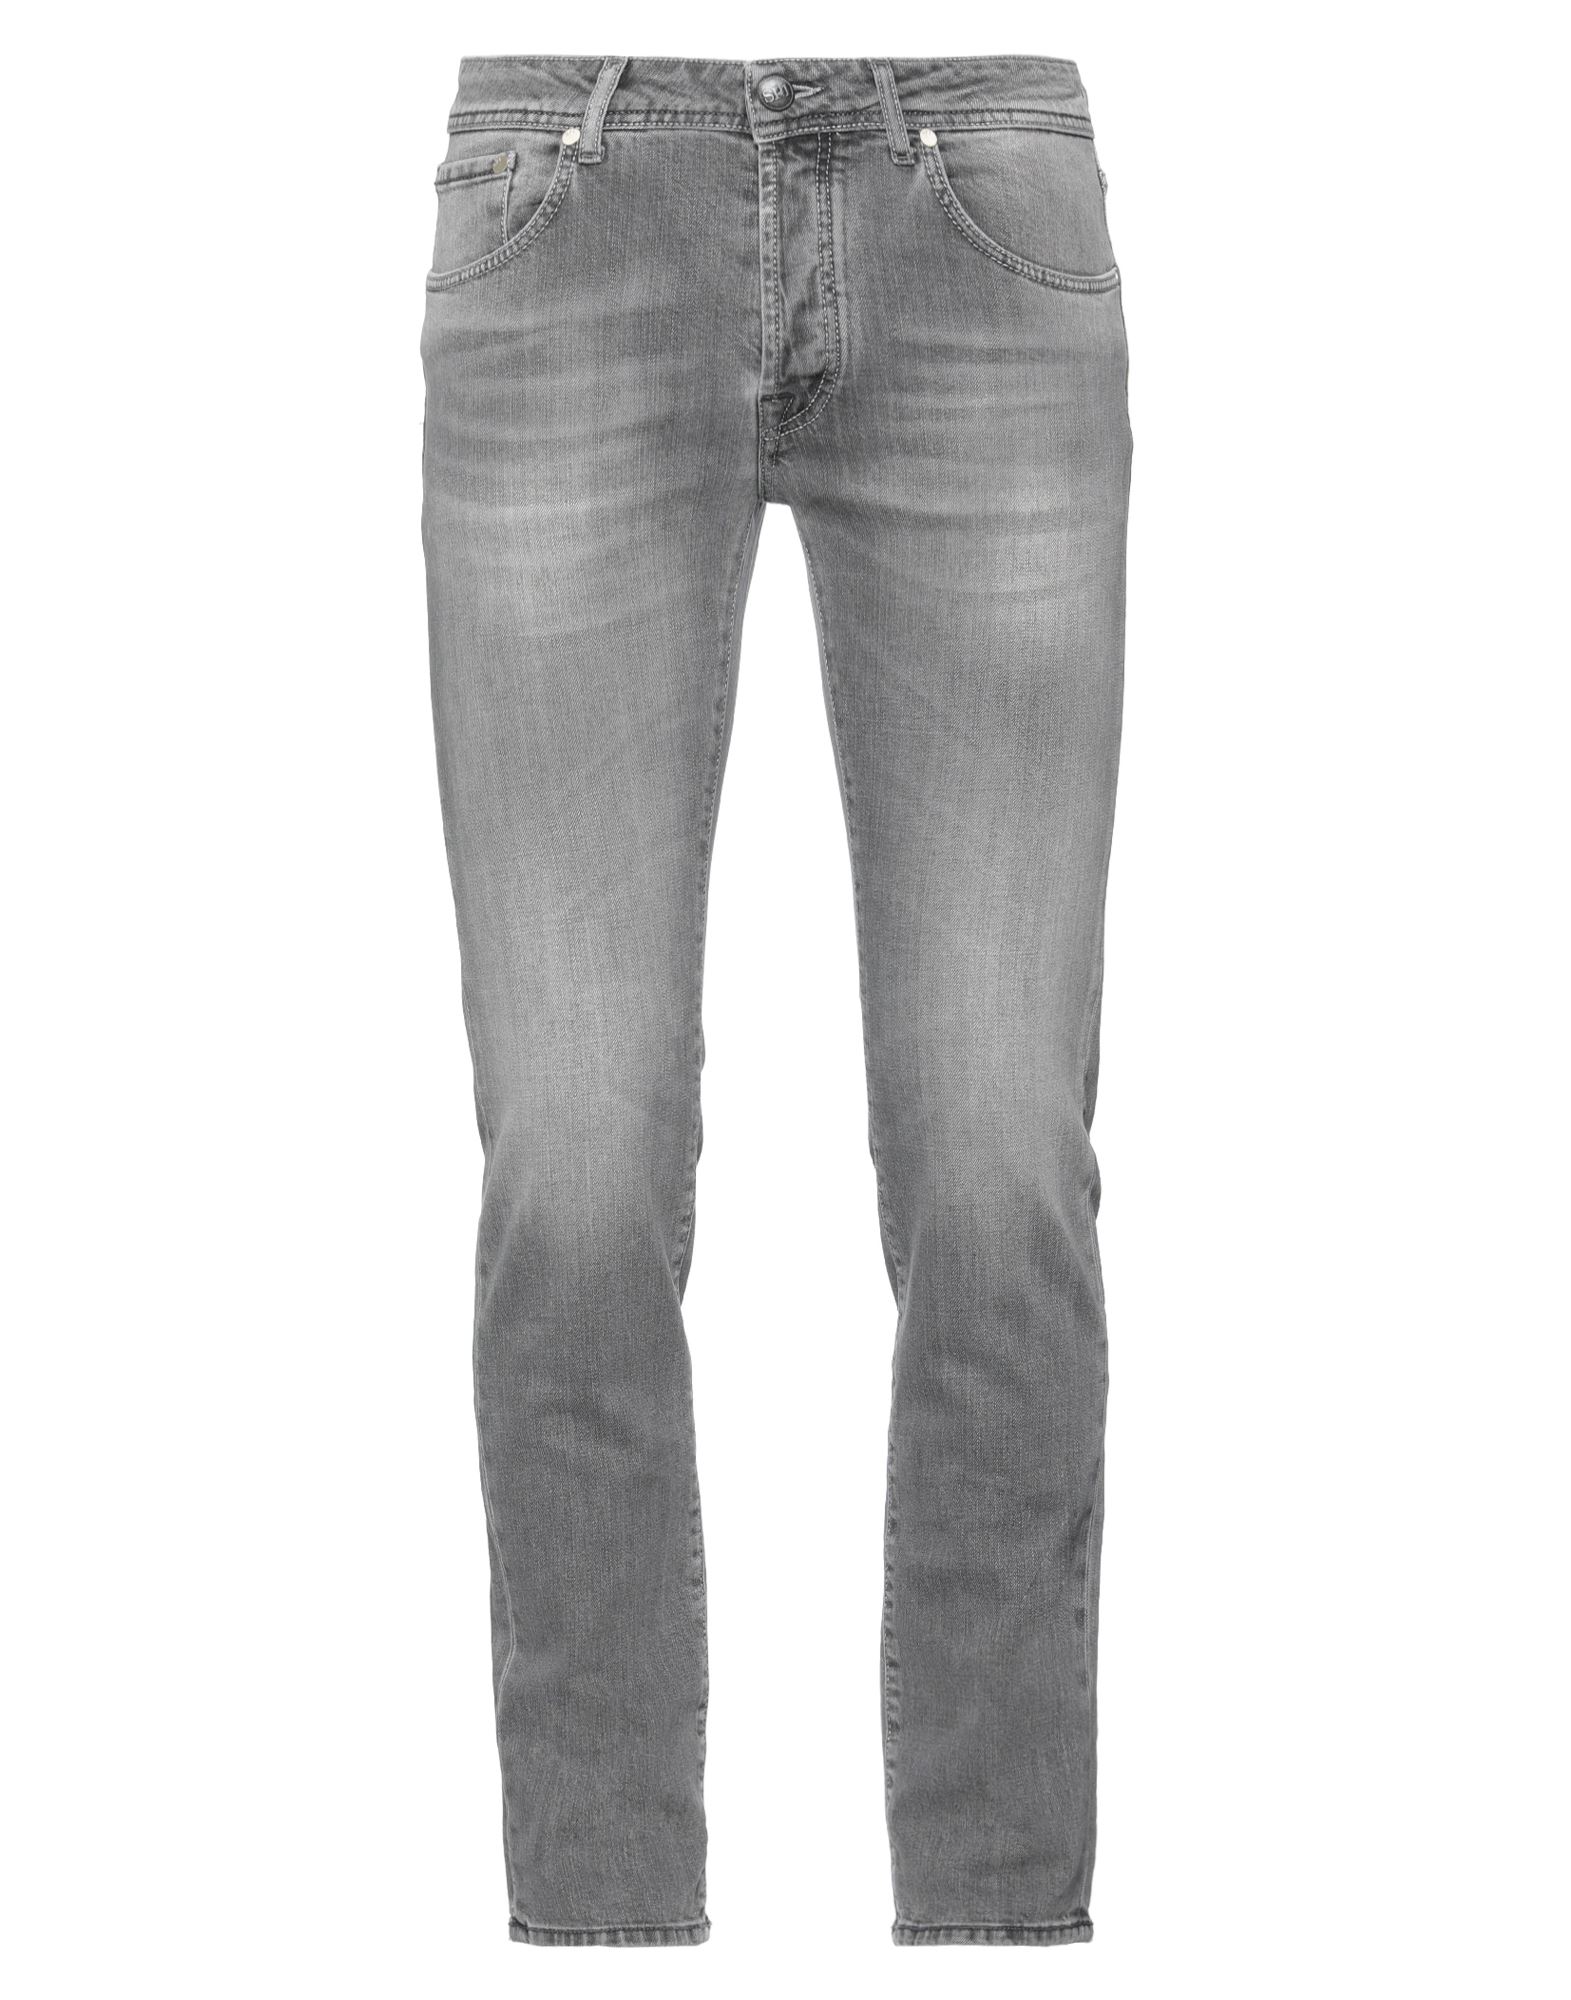 Sp1 Jeans In Lead